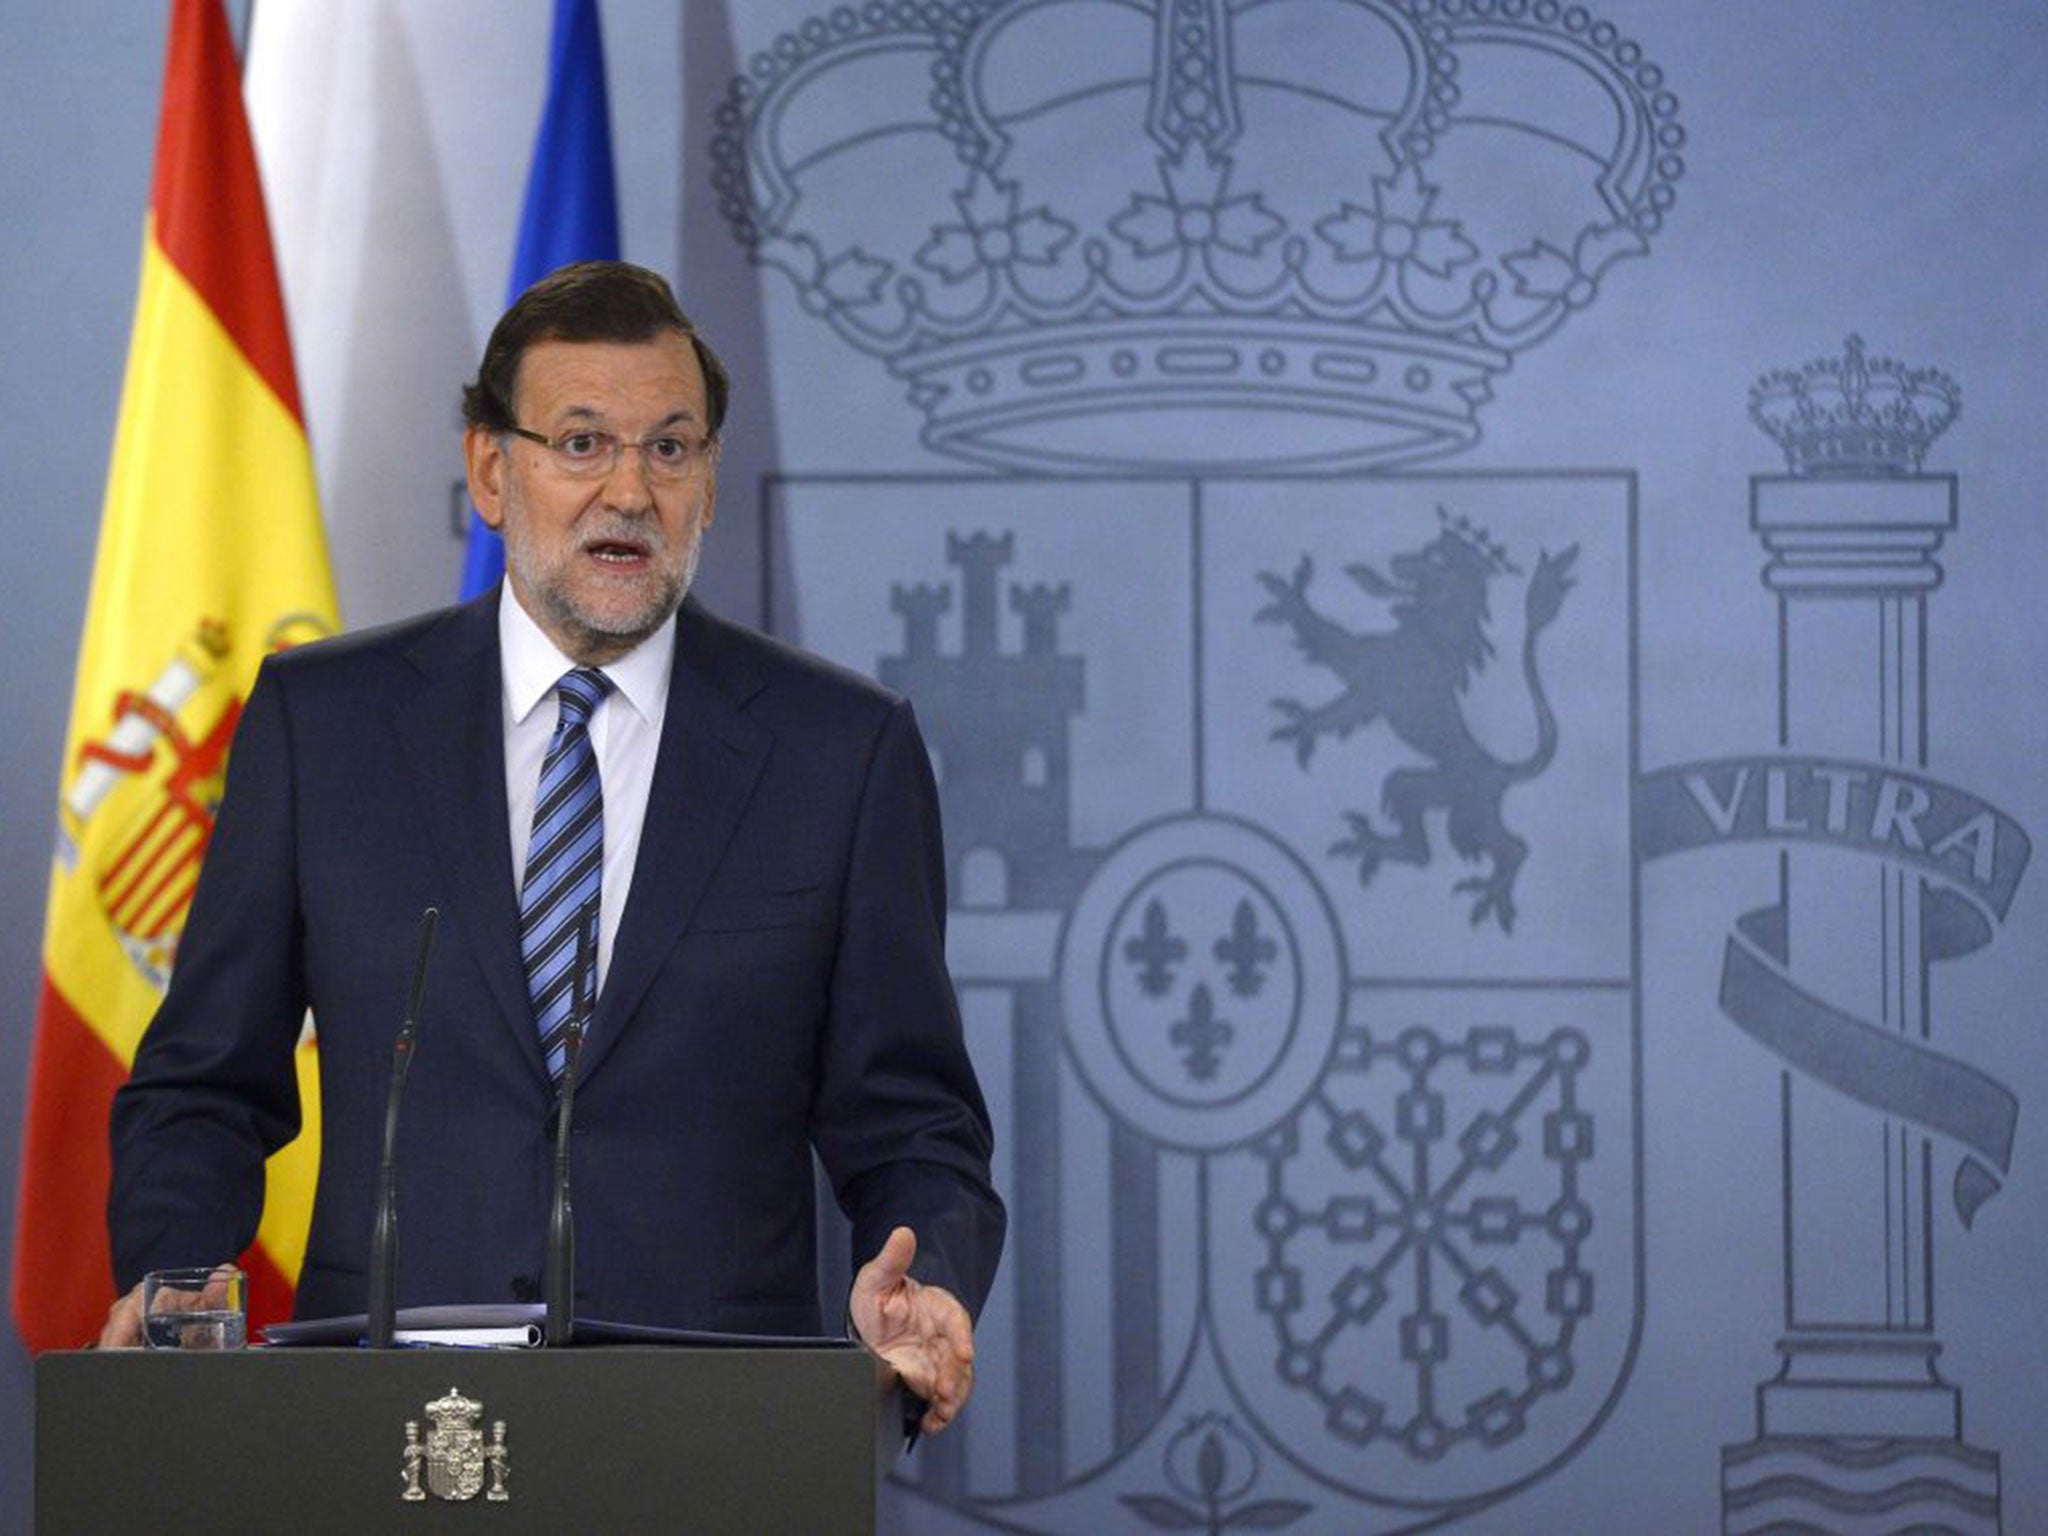 Prime Minister Mariano Rajoy remains open to talks with the Catalan government